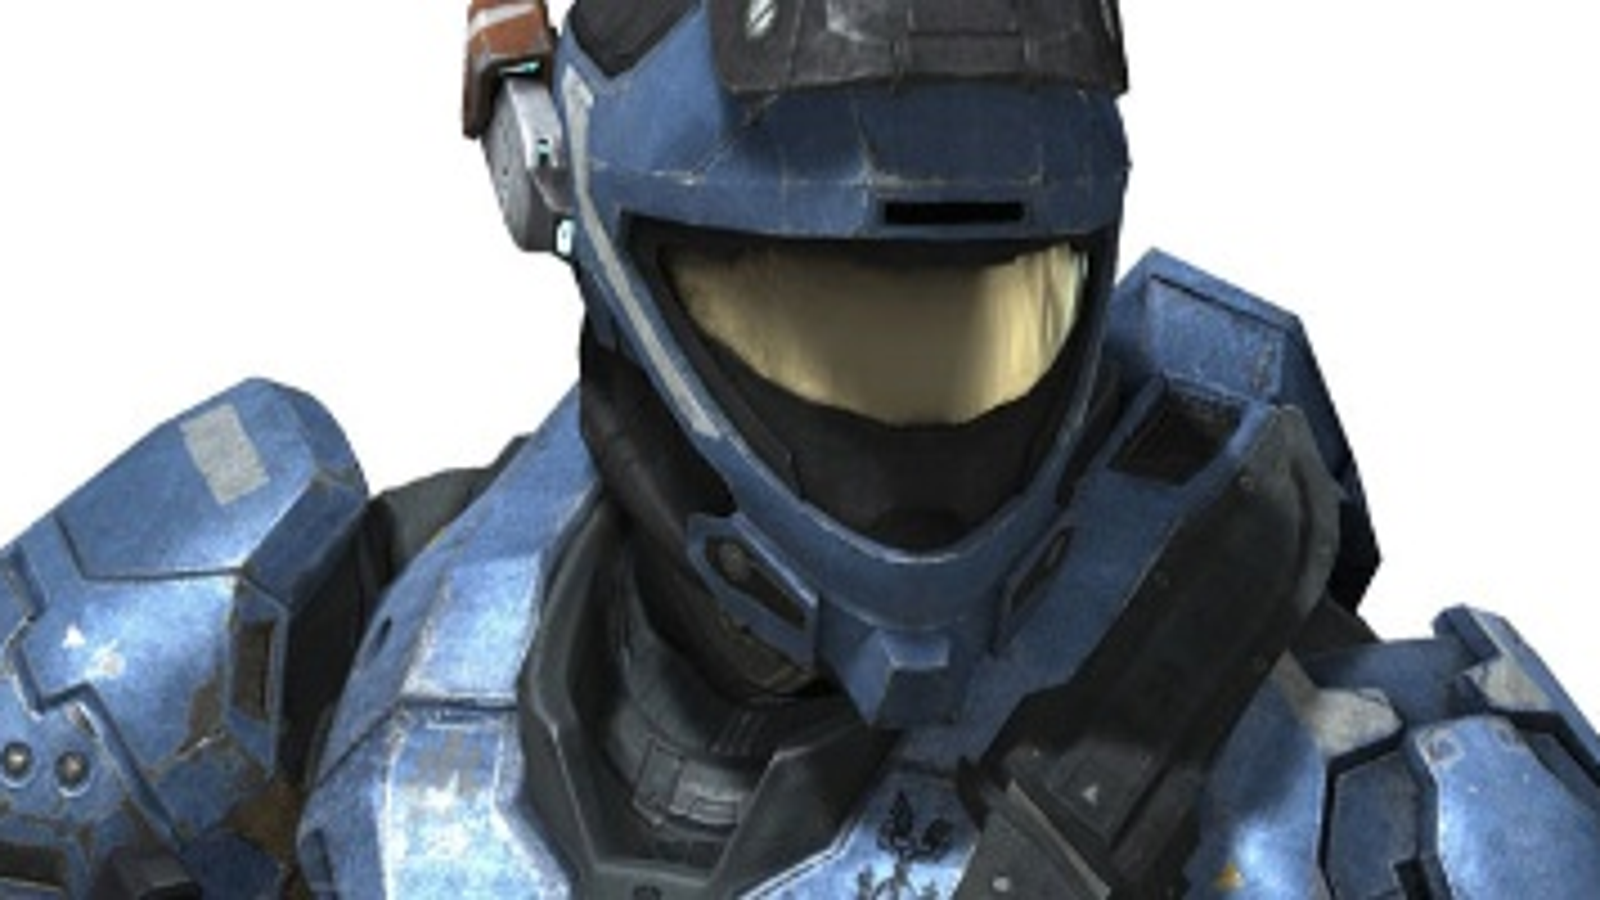 Pre-order Halo: Reach, get exclusive armour, old-school MP returns | VG247